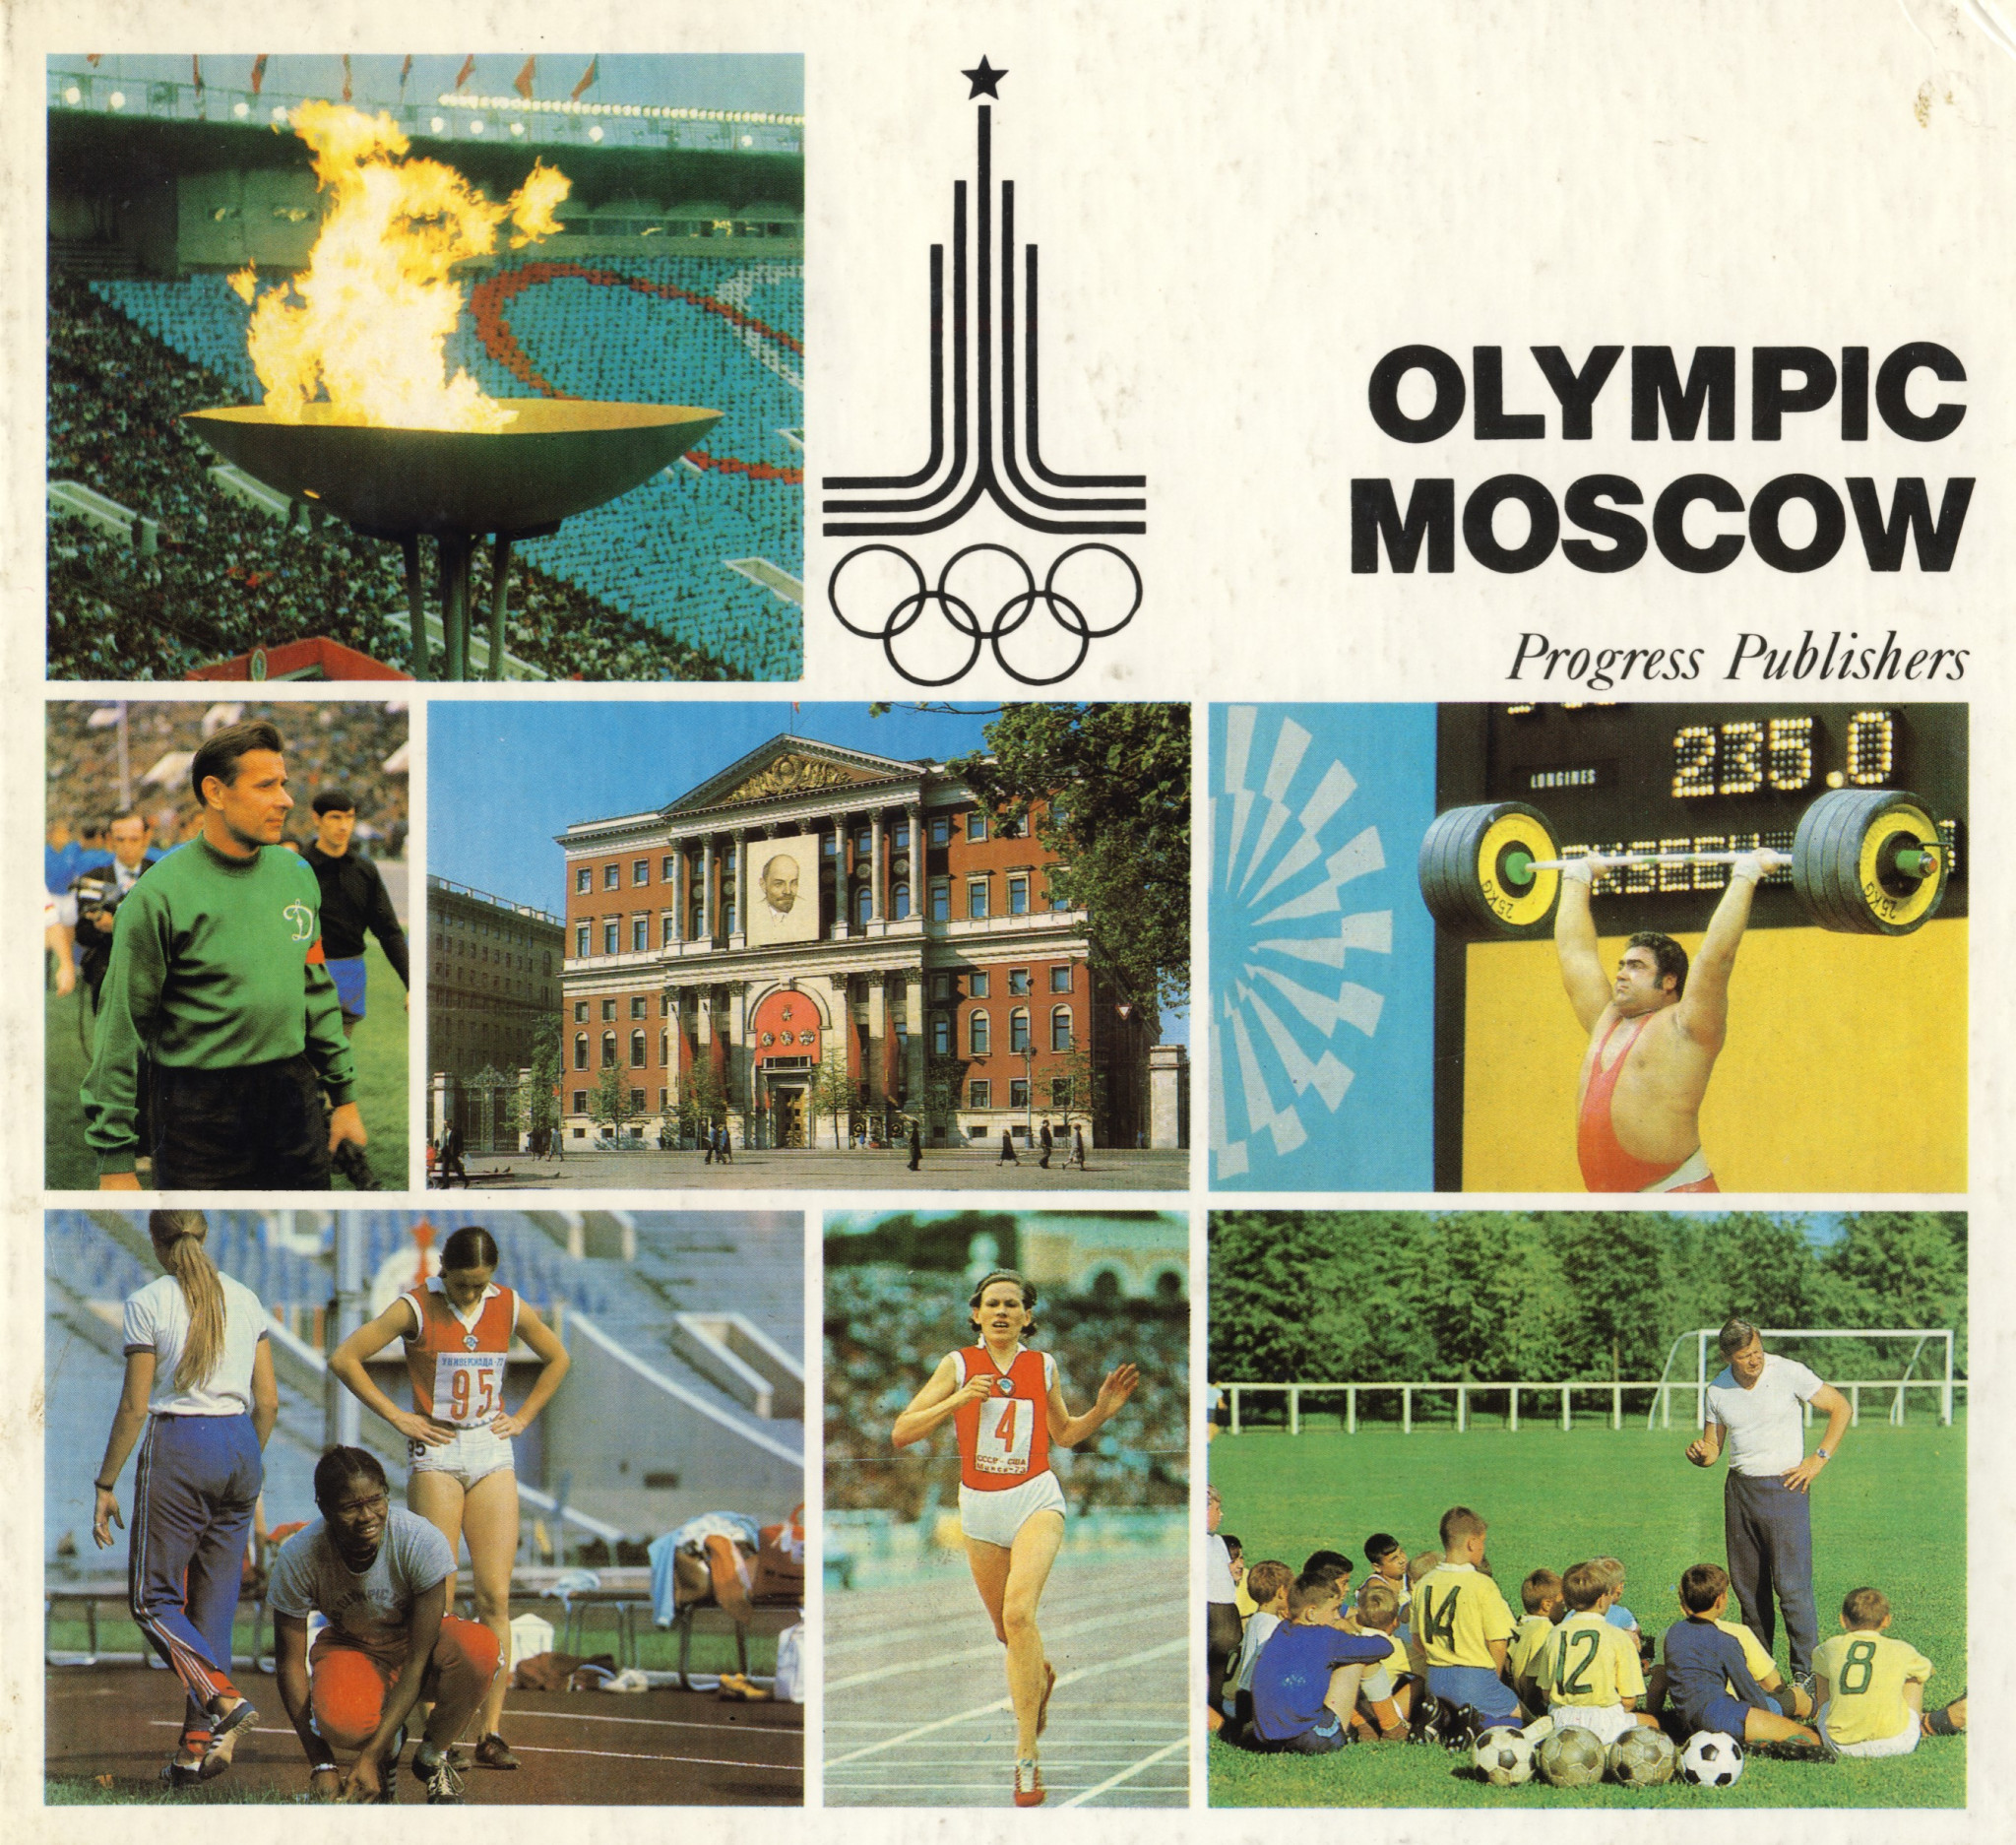 09237 Postcard Olympic Games 1980 Moscow Opening Ceremony MODERN